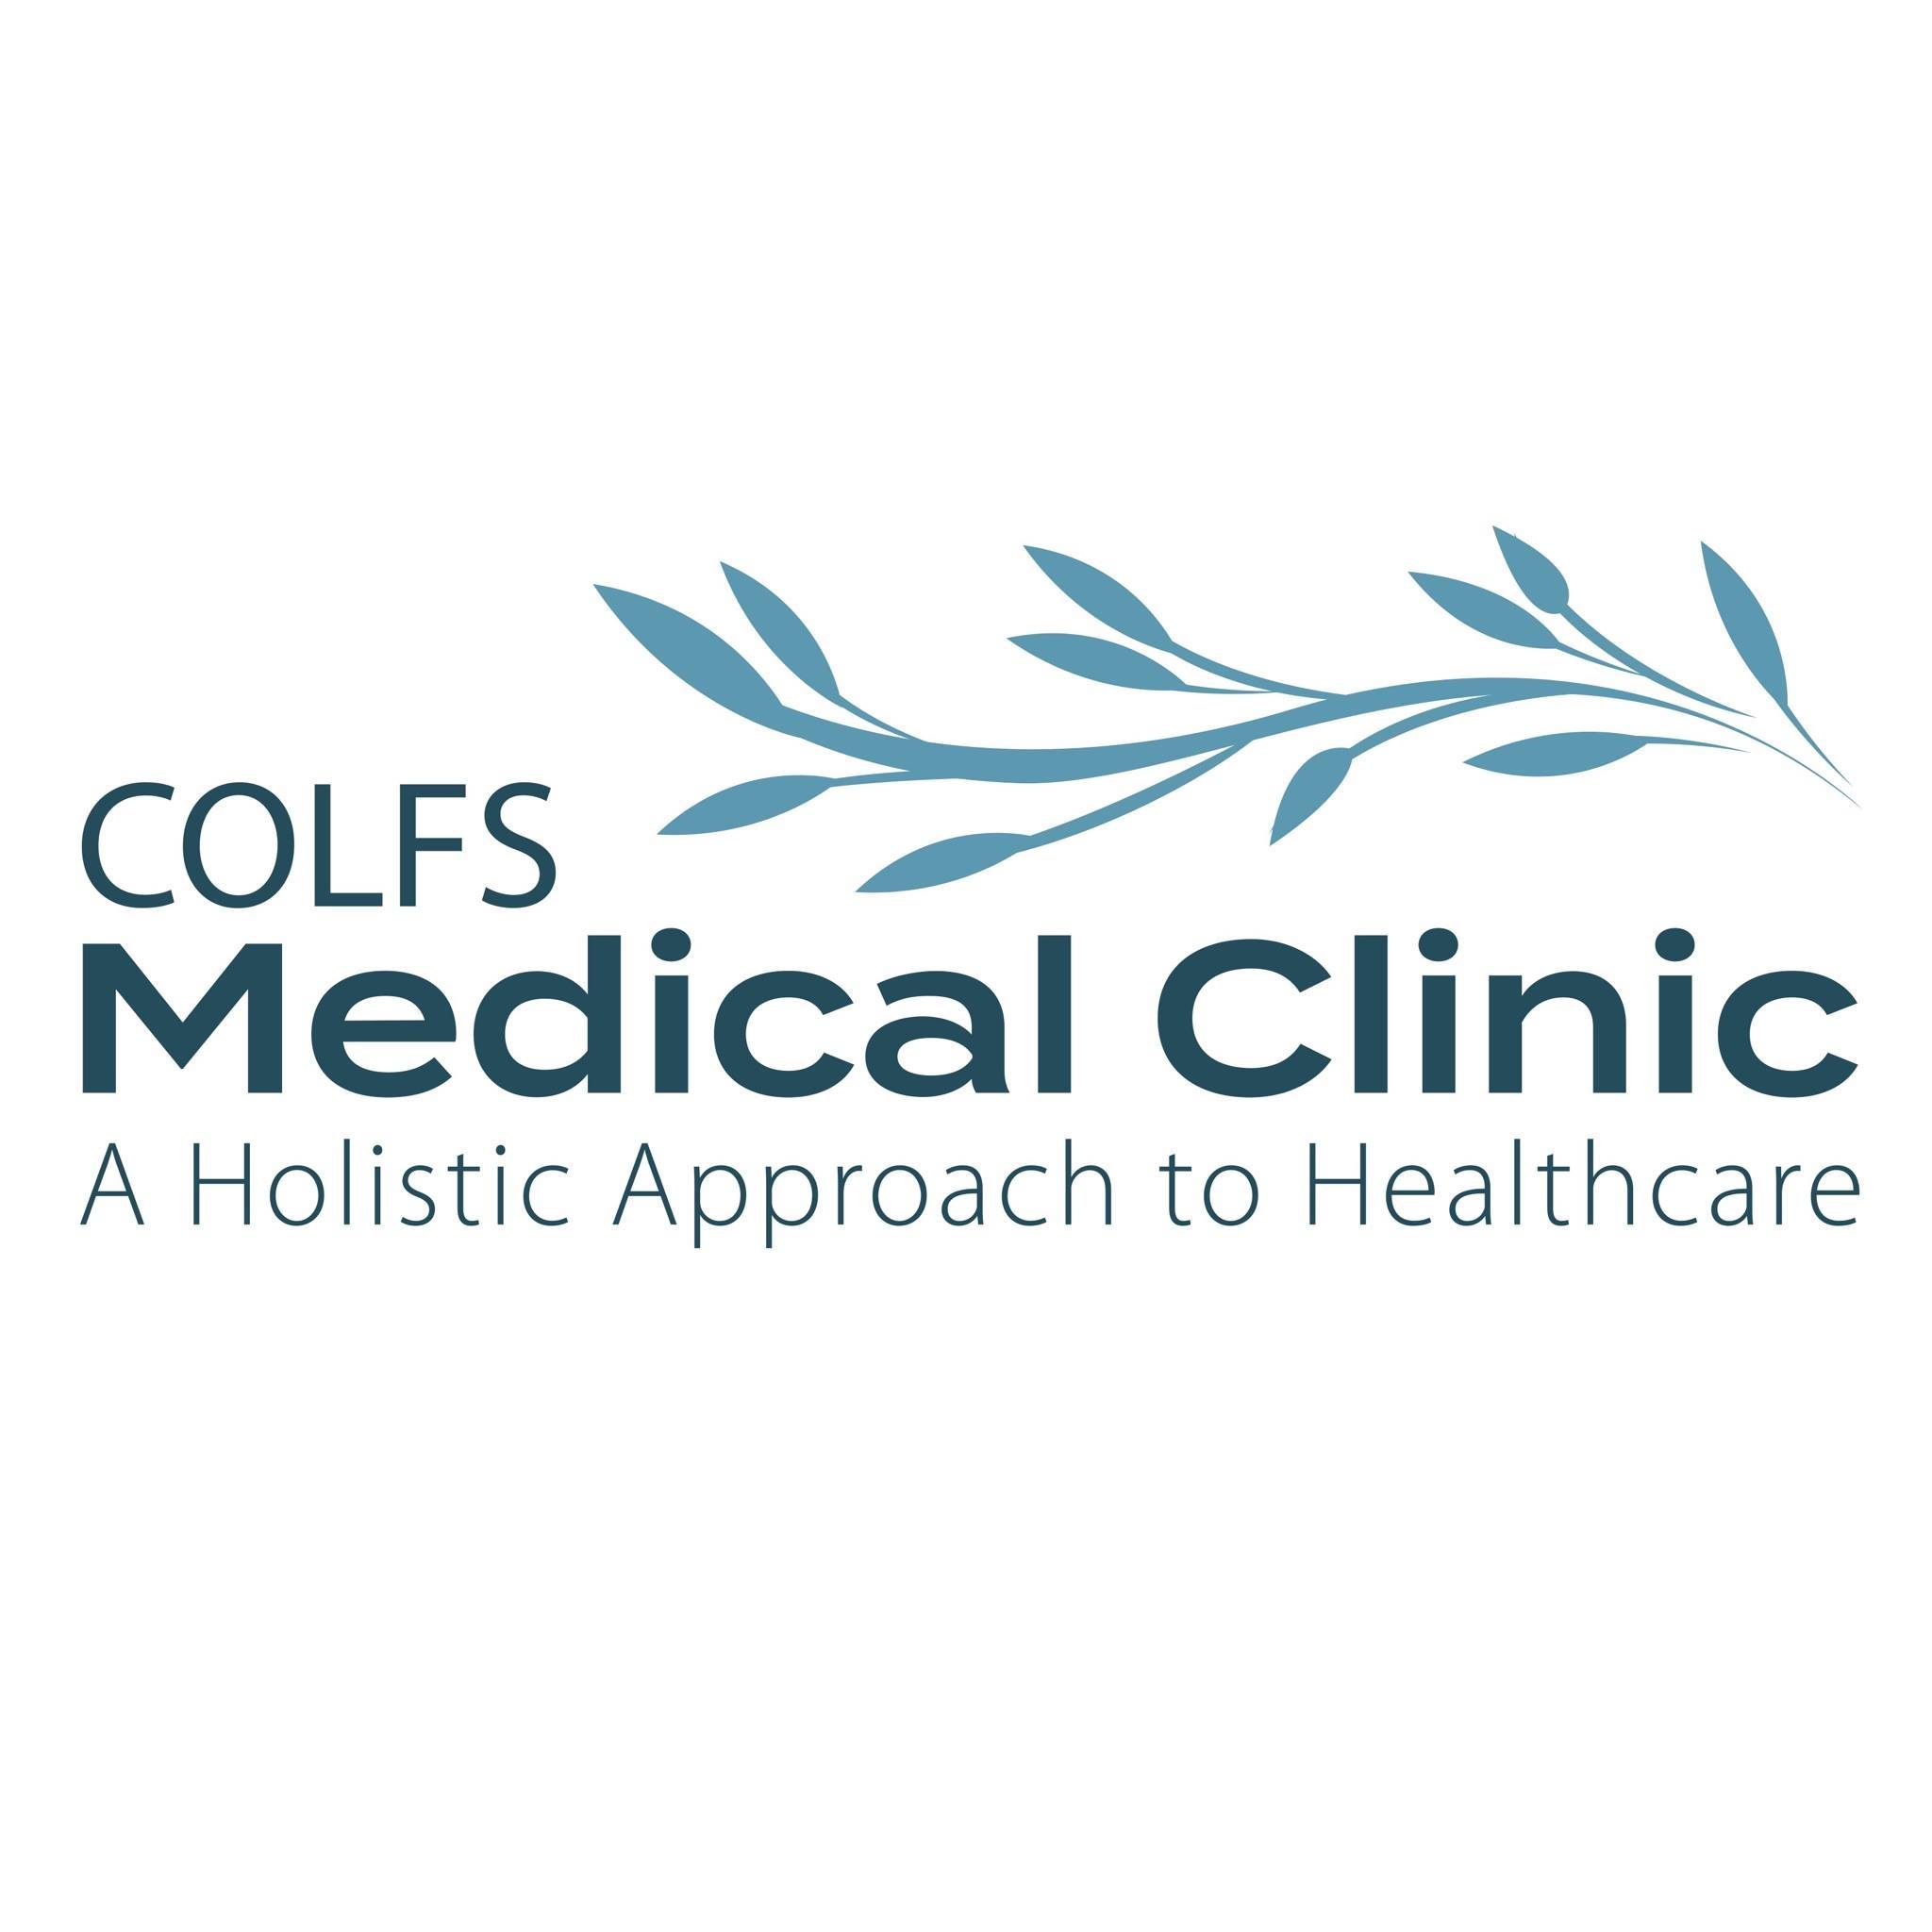 COLFS Medical Clinic